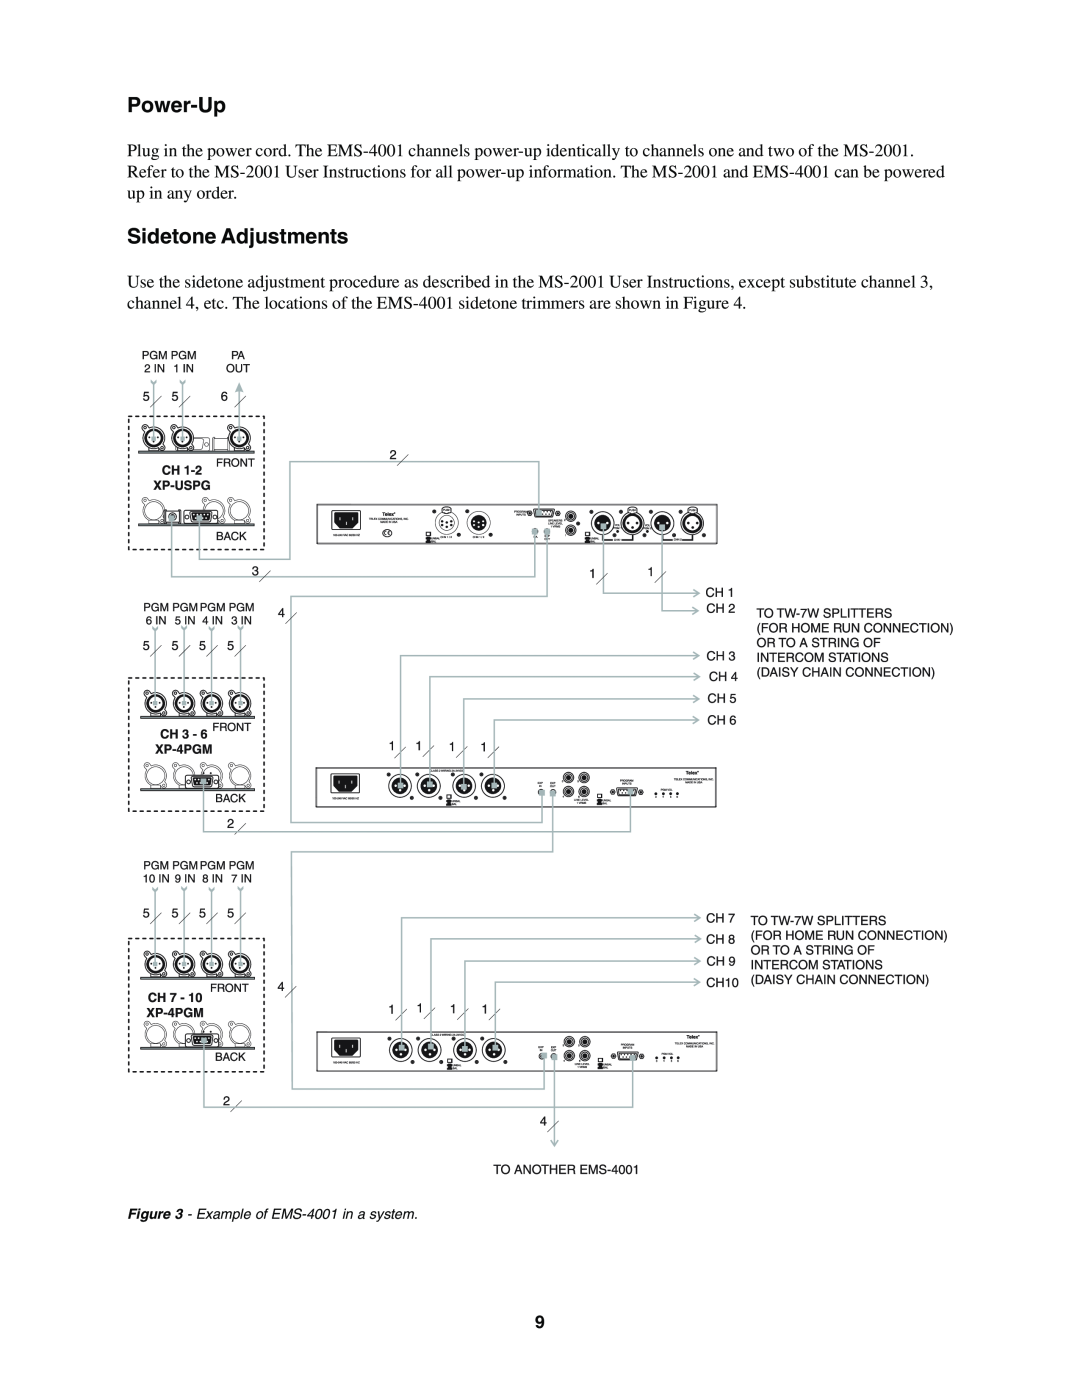 Telex manual Power-Up, Sidetone Adjustments, Example of EMS-4001in a system 